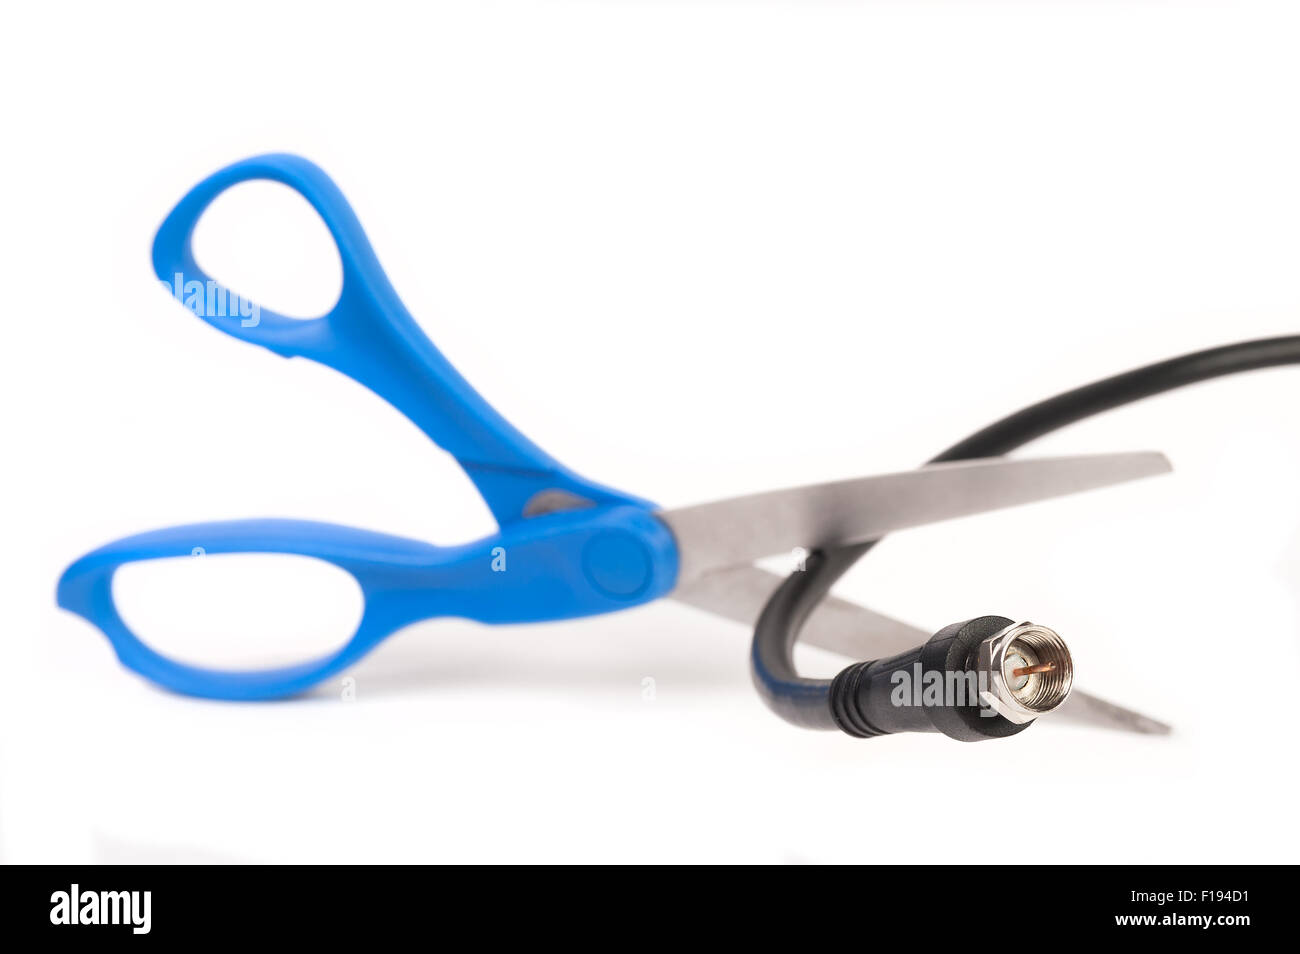 Scissors cutting through a coaxial RG6 cable - cut the cable tv concept isolated on white background Stock Photo